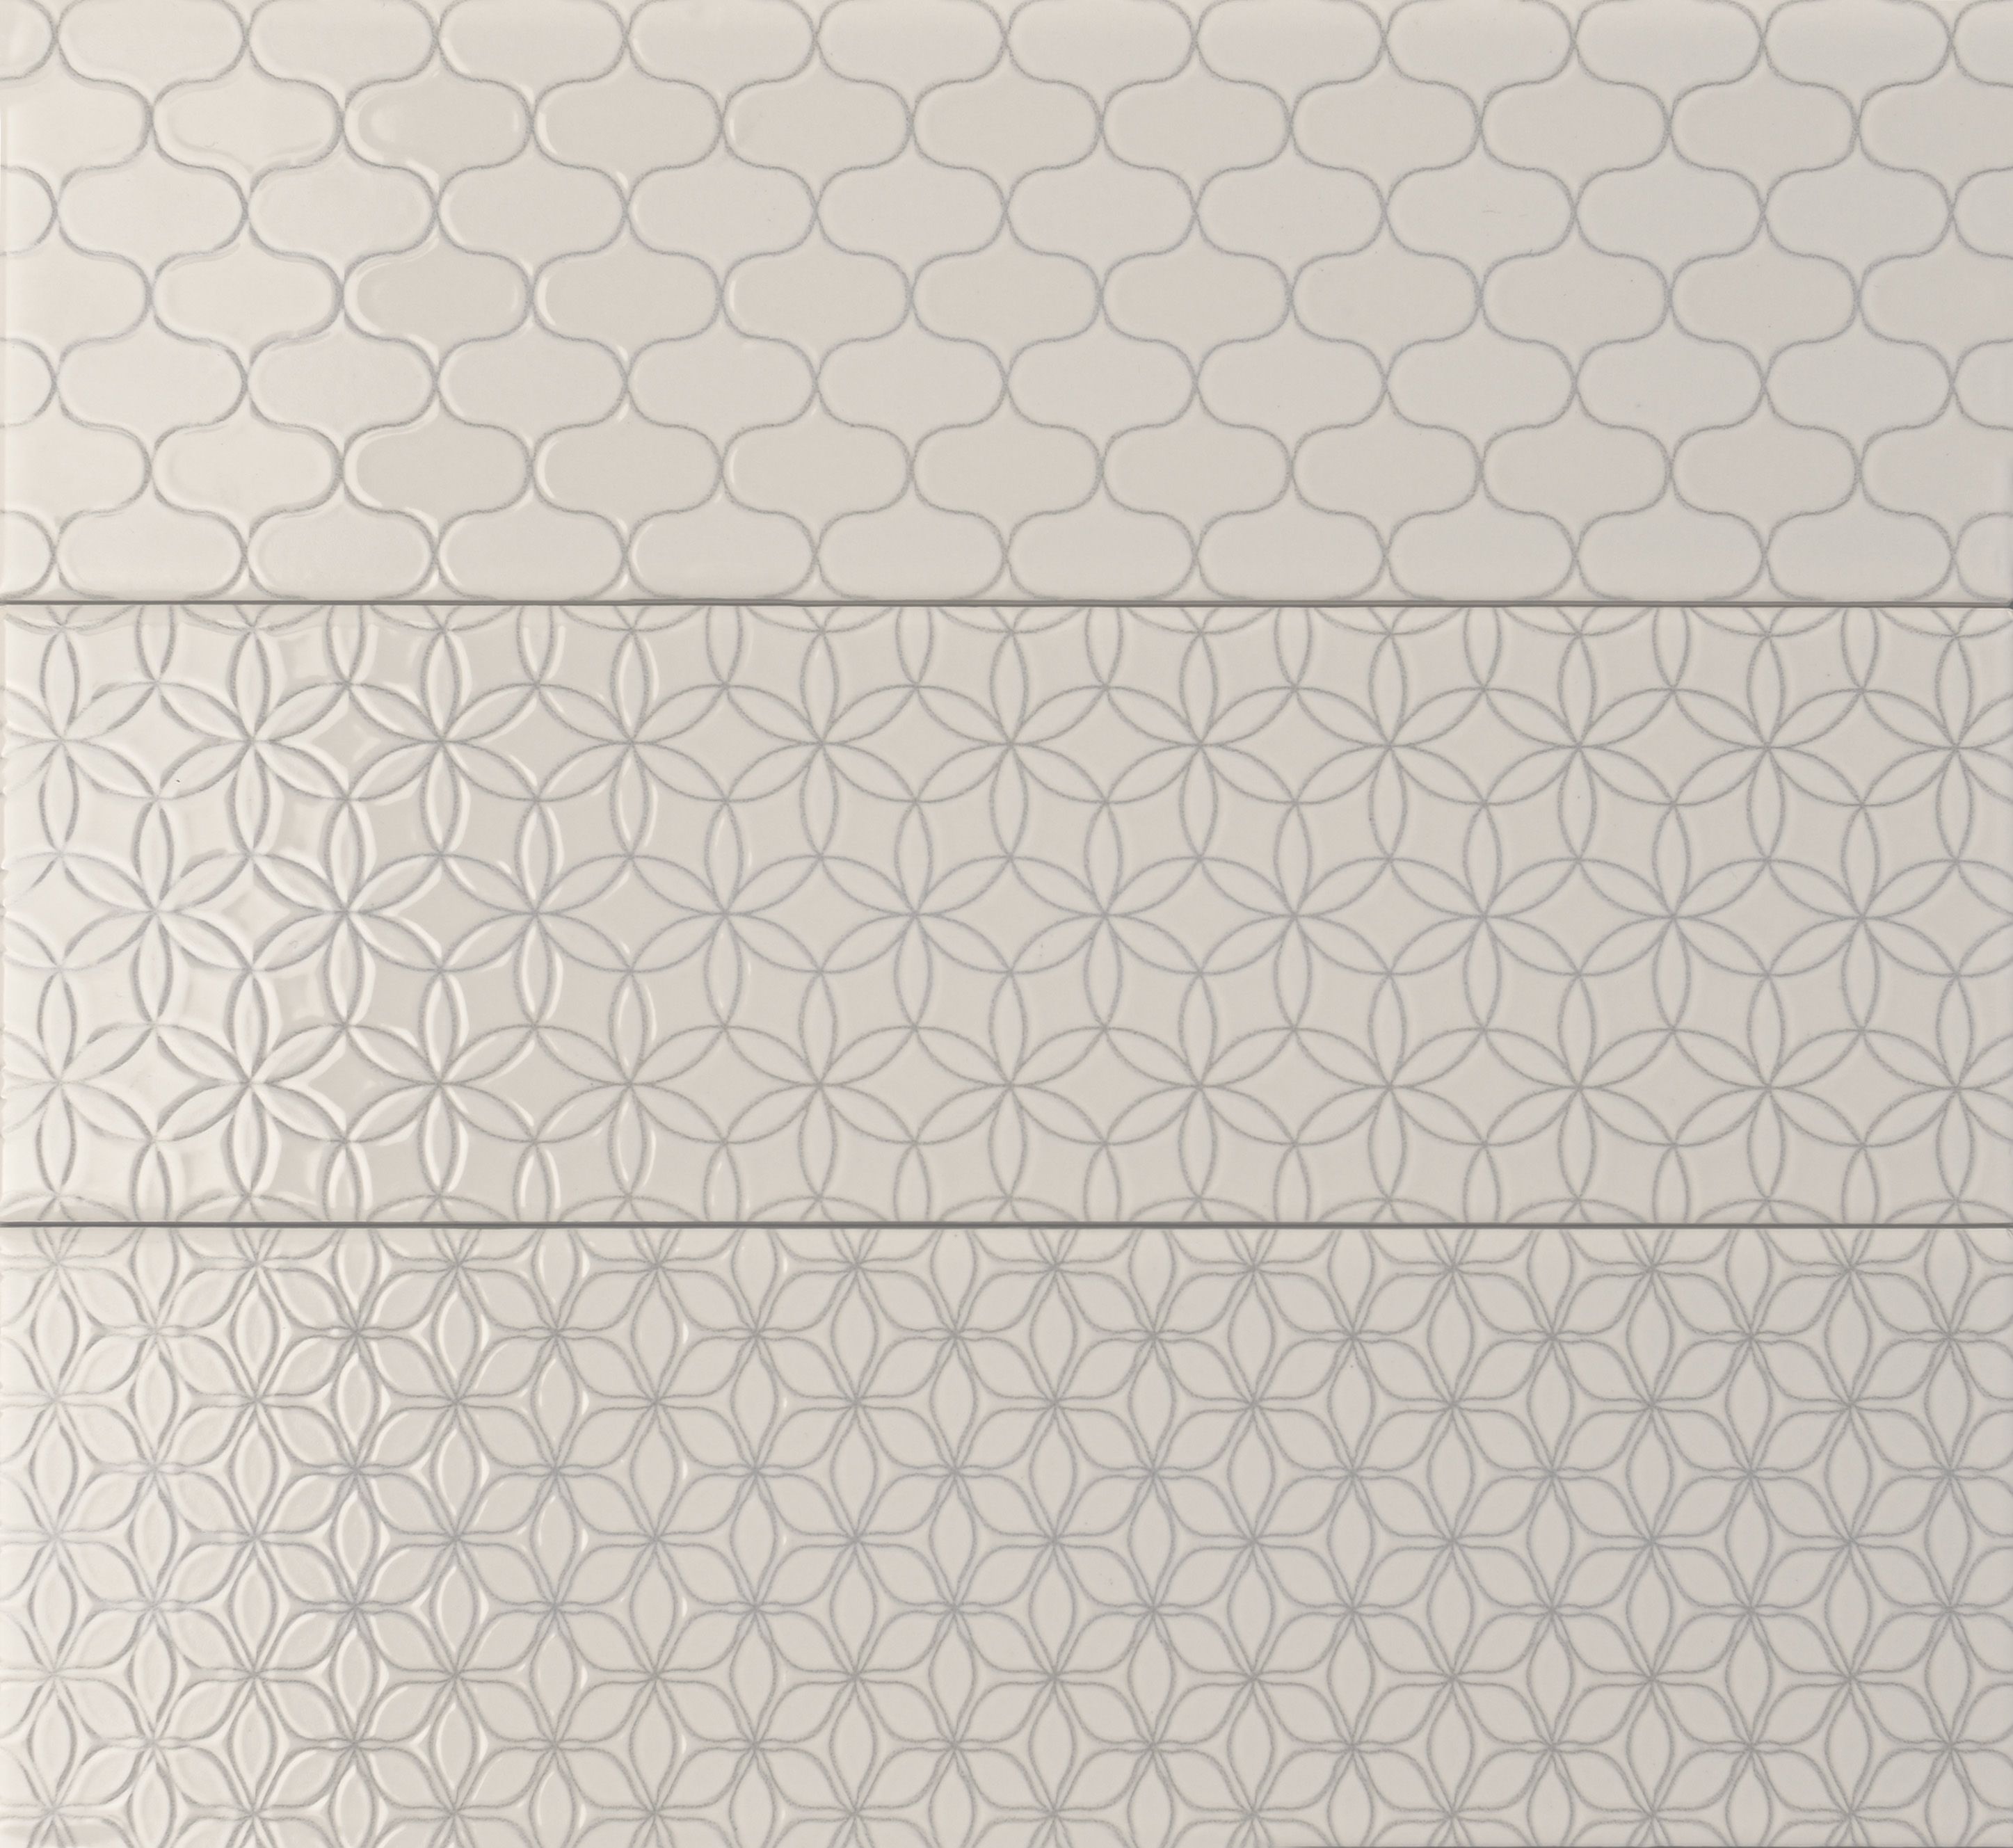 Johnson Tiles Tangier Ivory Gloss Patterned Textured Ceramic Indoor Wall Tile, Pack of 54, (L)245mm (W)75mm